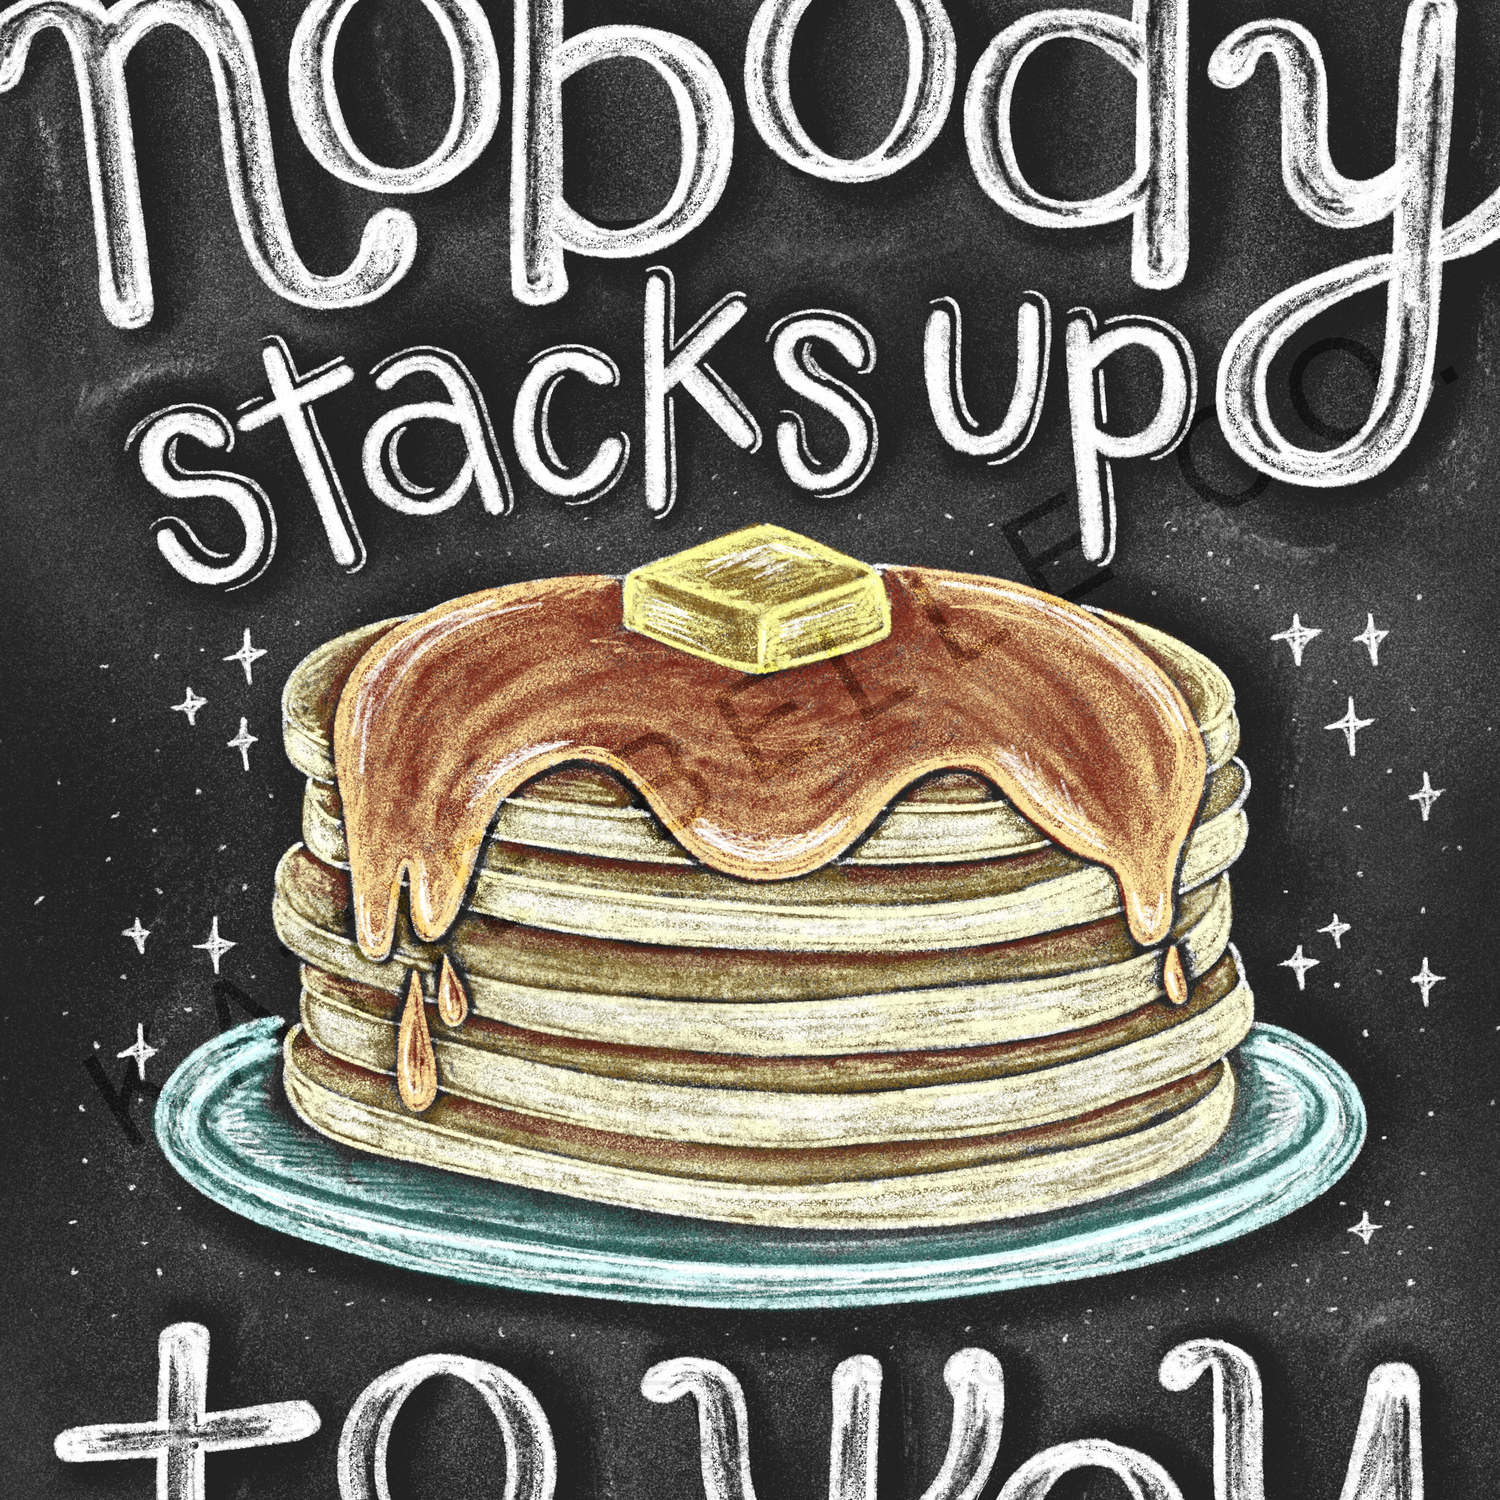 Nobody stacks up to you. Greeting card. Pancake stack. dripping syrup. butter on top. breakfast theme. Chalk art. chalkboard card. blank inside. A2 size. Love greeting card. Anniversary card. Just because card. Breakfast lovers. Katie Belle Co. 